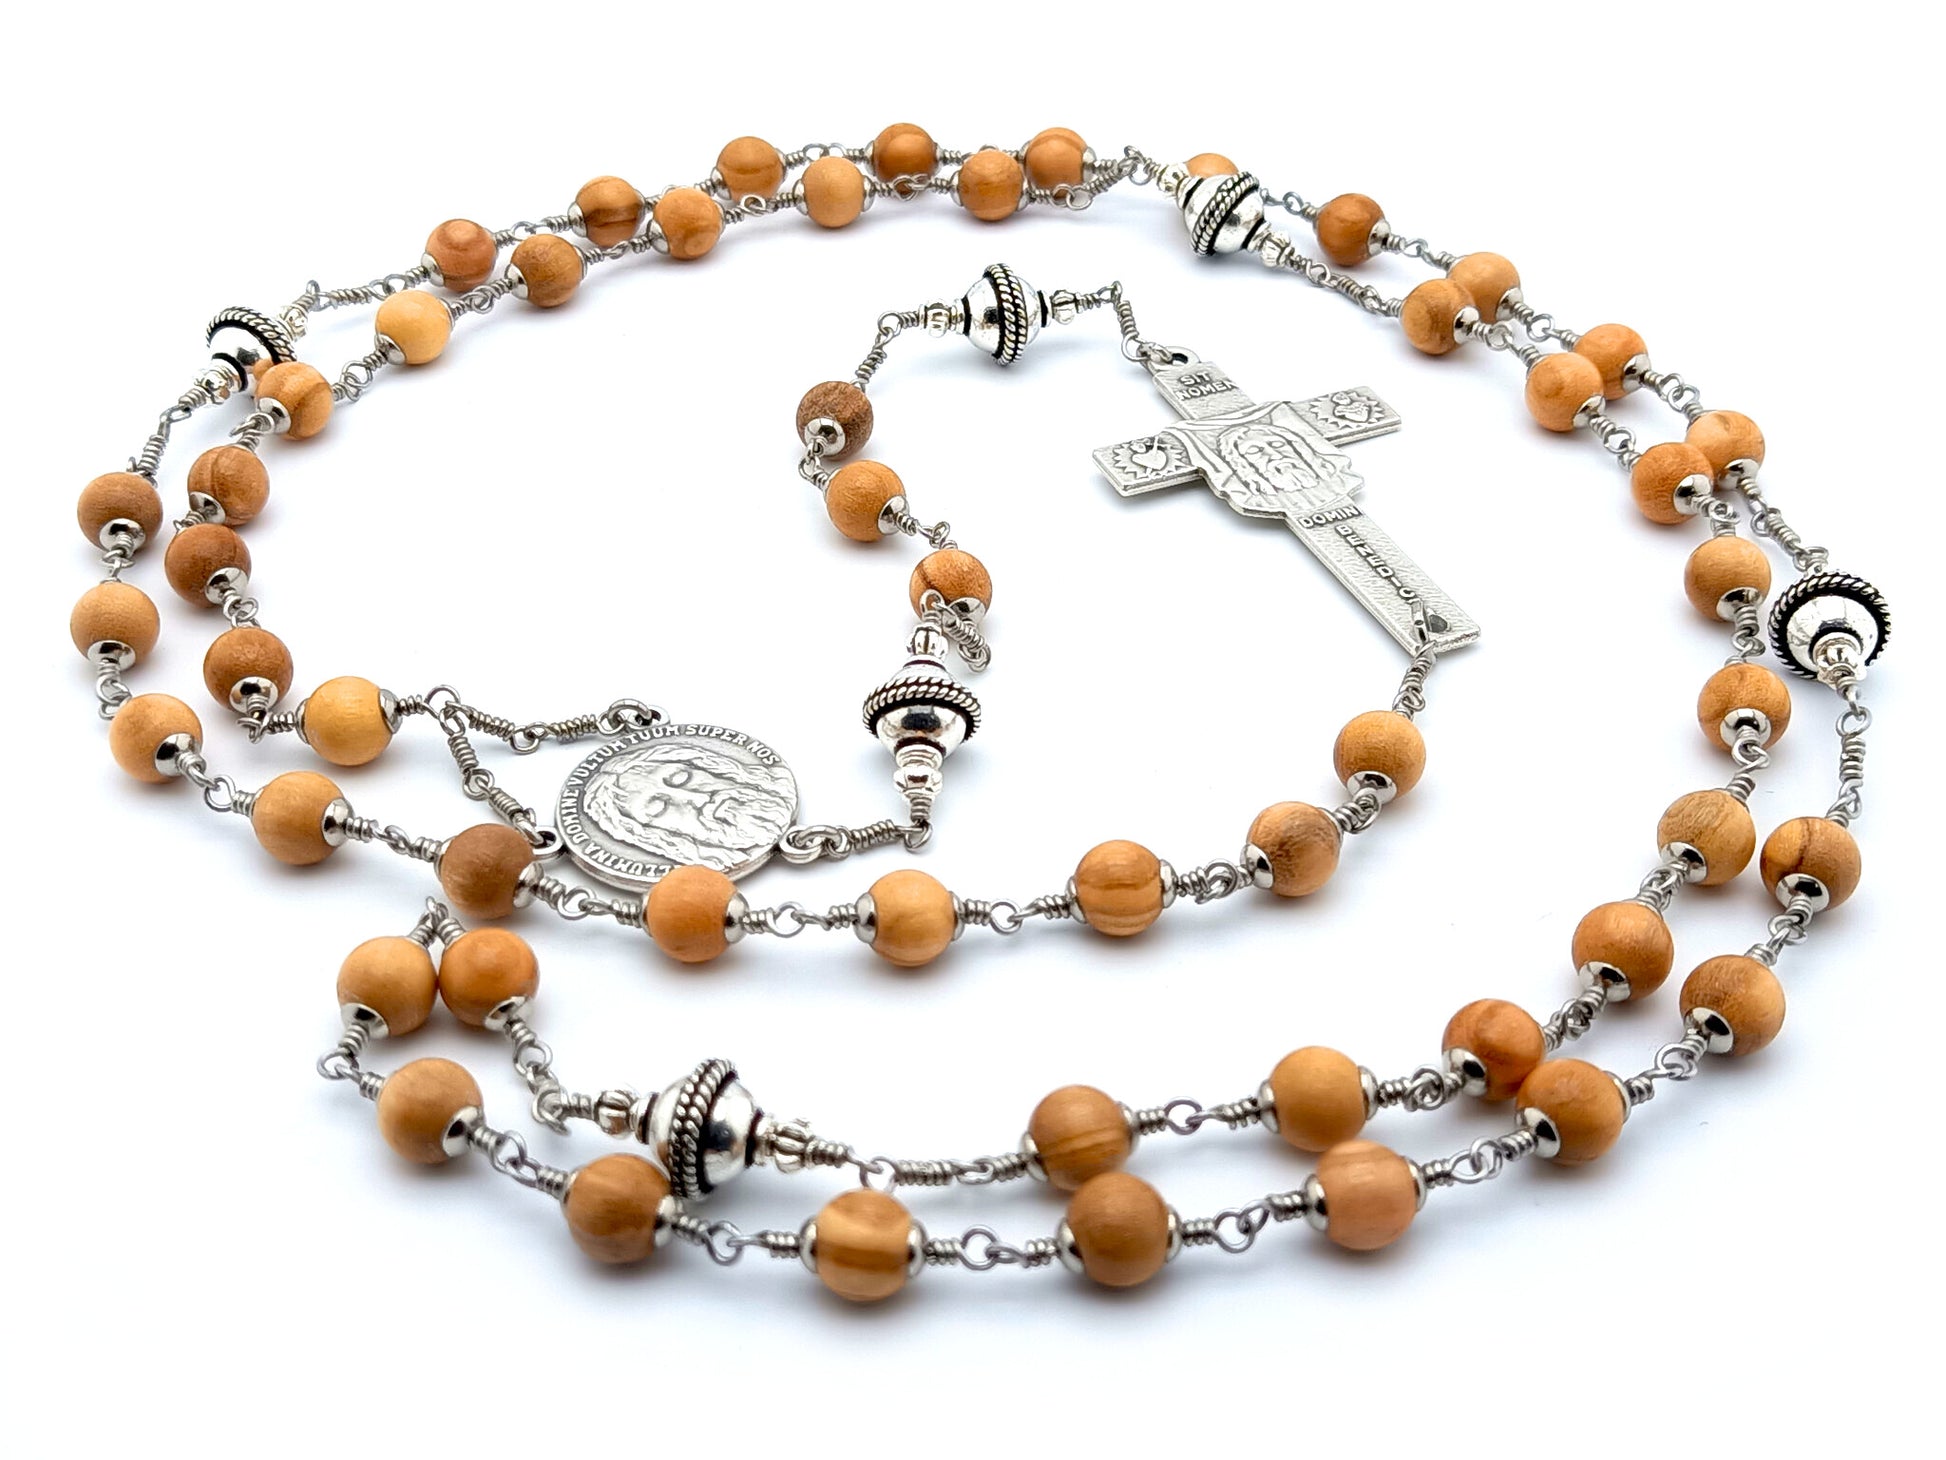 Holy Face of Jesus unique rosary beads unbreakable circular rosary with wooden and silver beads, Holy Face centre medal and crucifix.